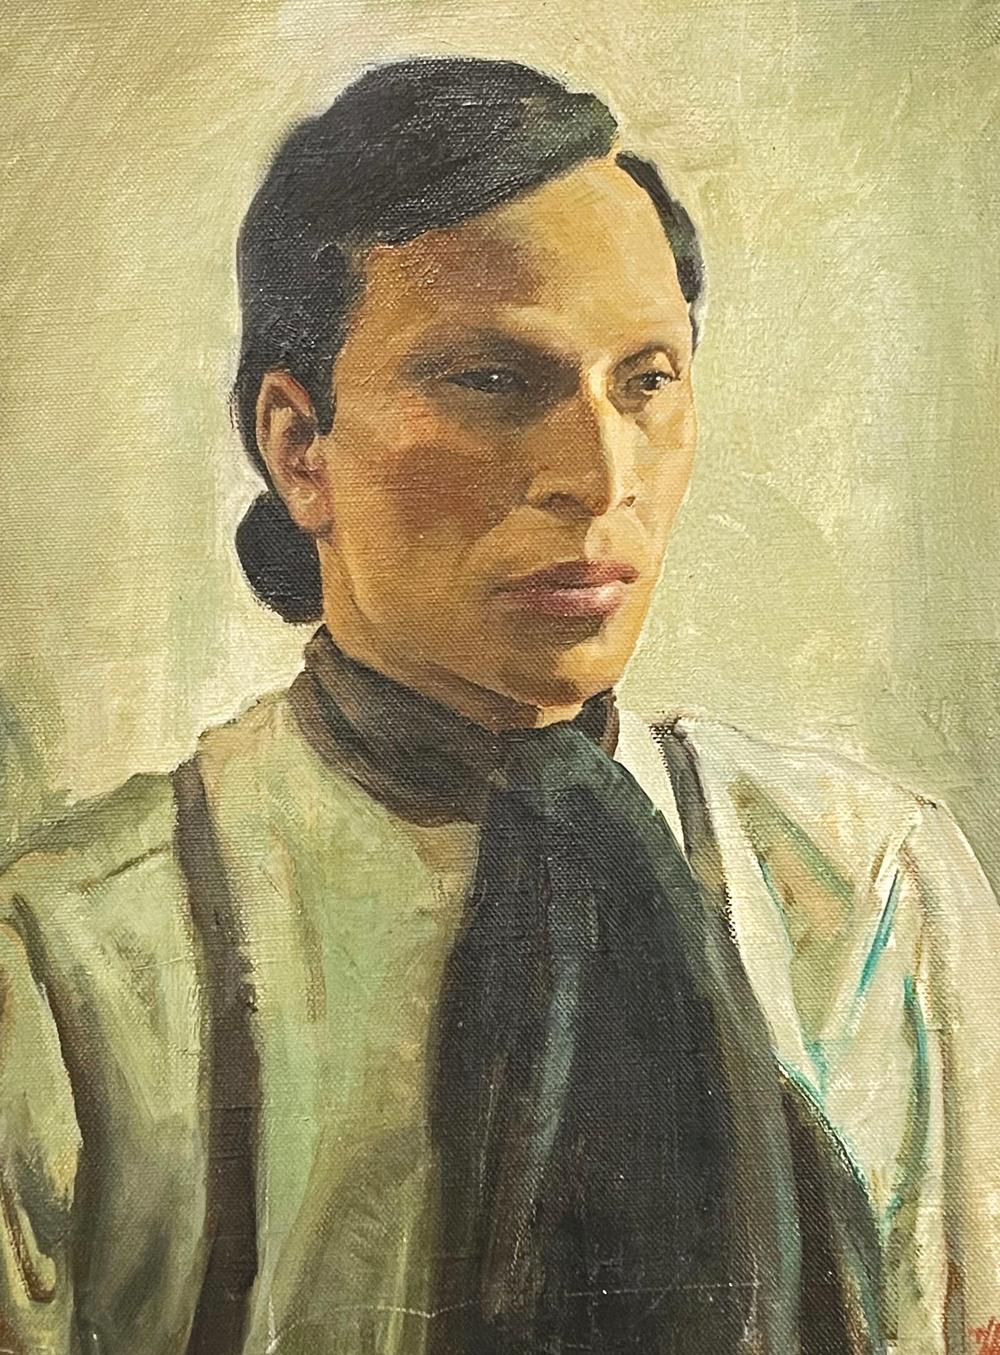 This strong and dignified portrait of the great Cherokee leader, Junaluska, painted by one of America's leading illustrators long after the Native American's death, uses a palette of black and mossy green to capture its subject. Junaluska lived in